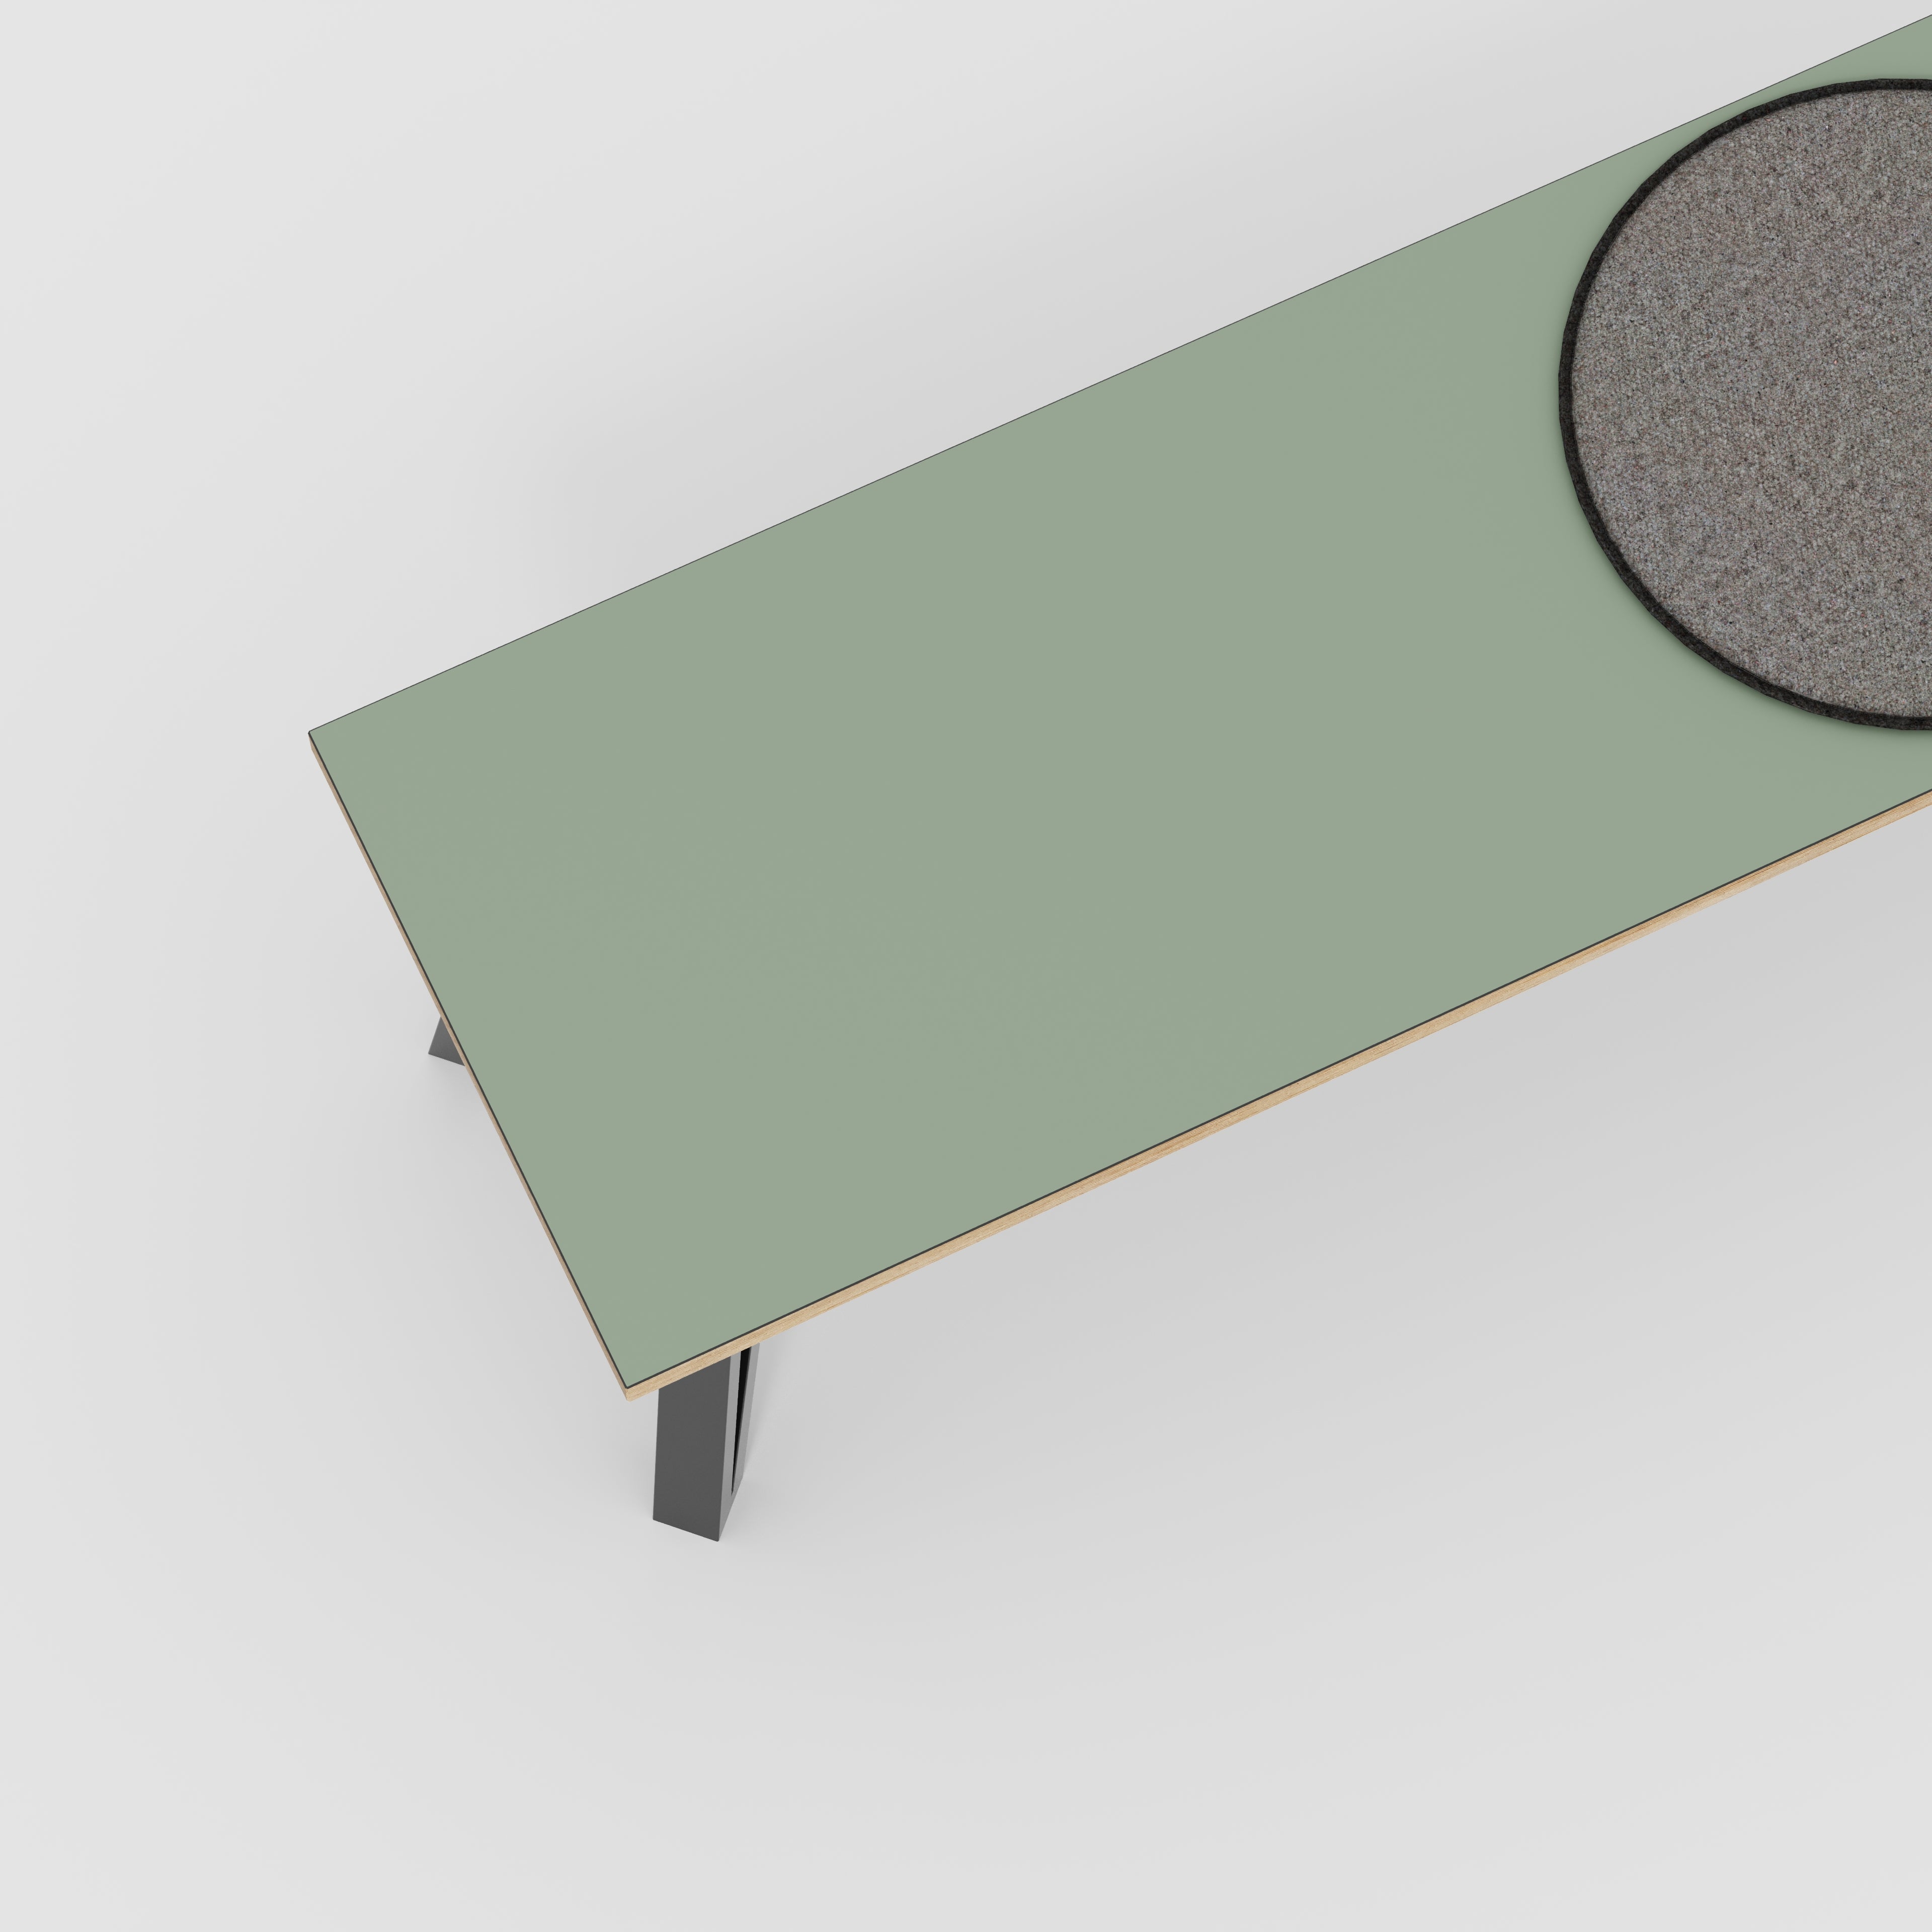 Bench Seat with Black Box Hairpin Legs - Formica Green Slate - 1200(w) x 400(d) x 450(h)